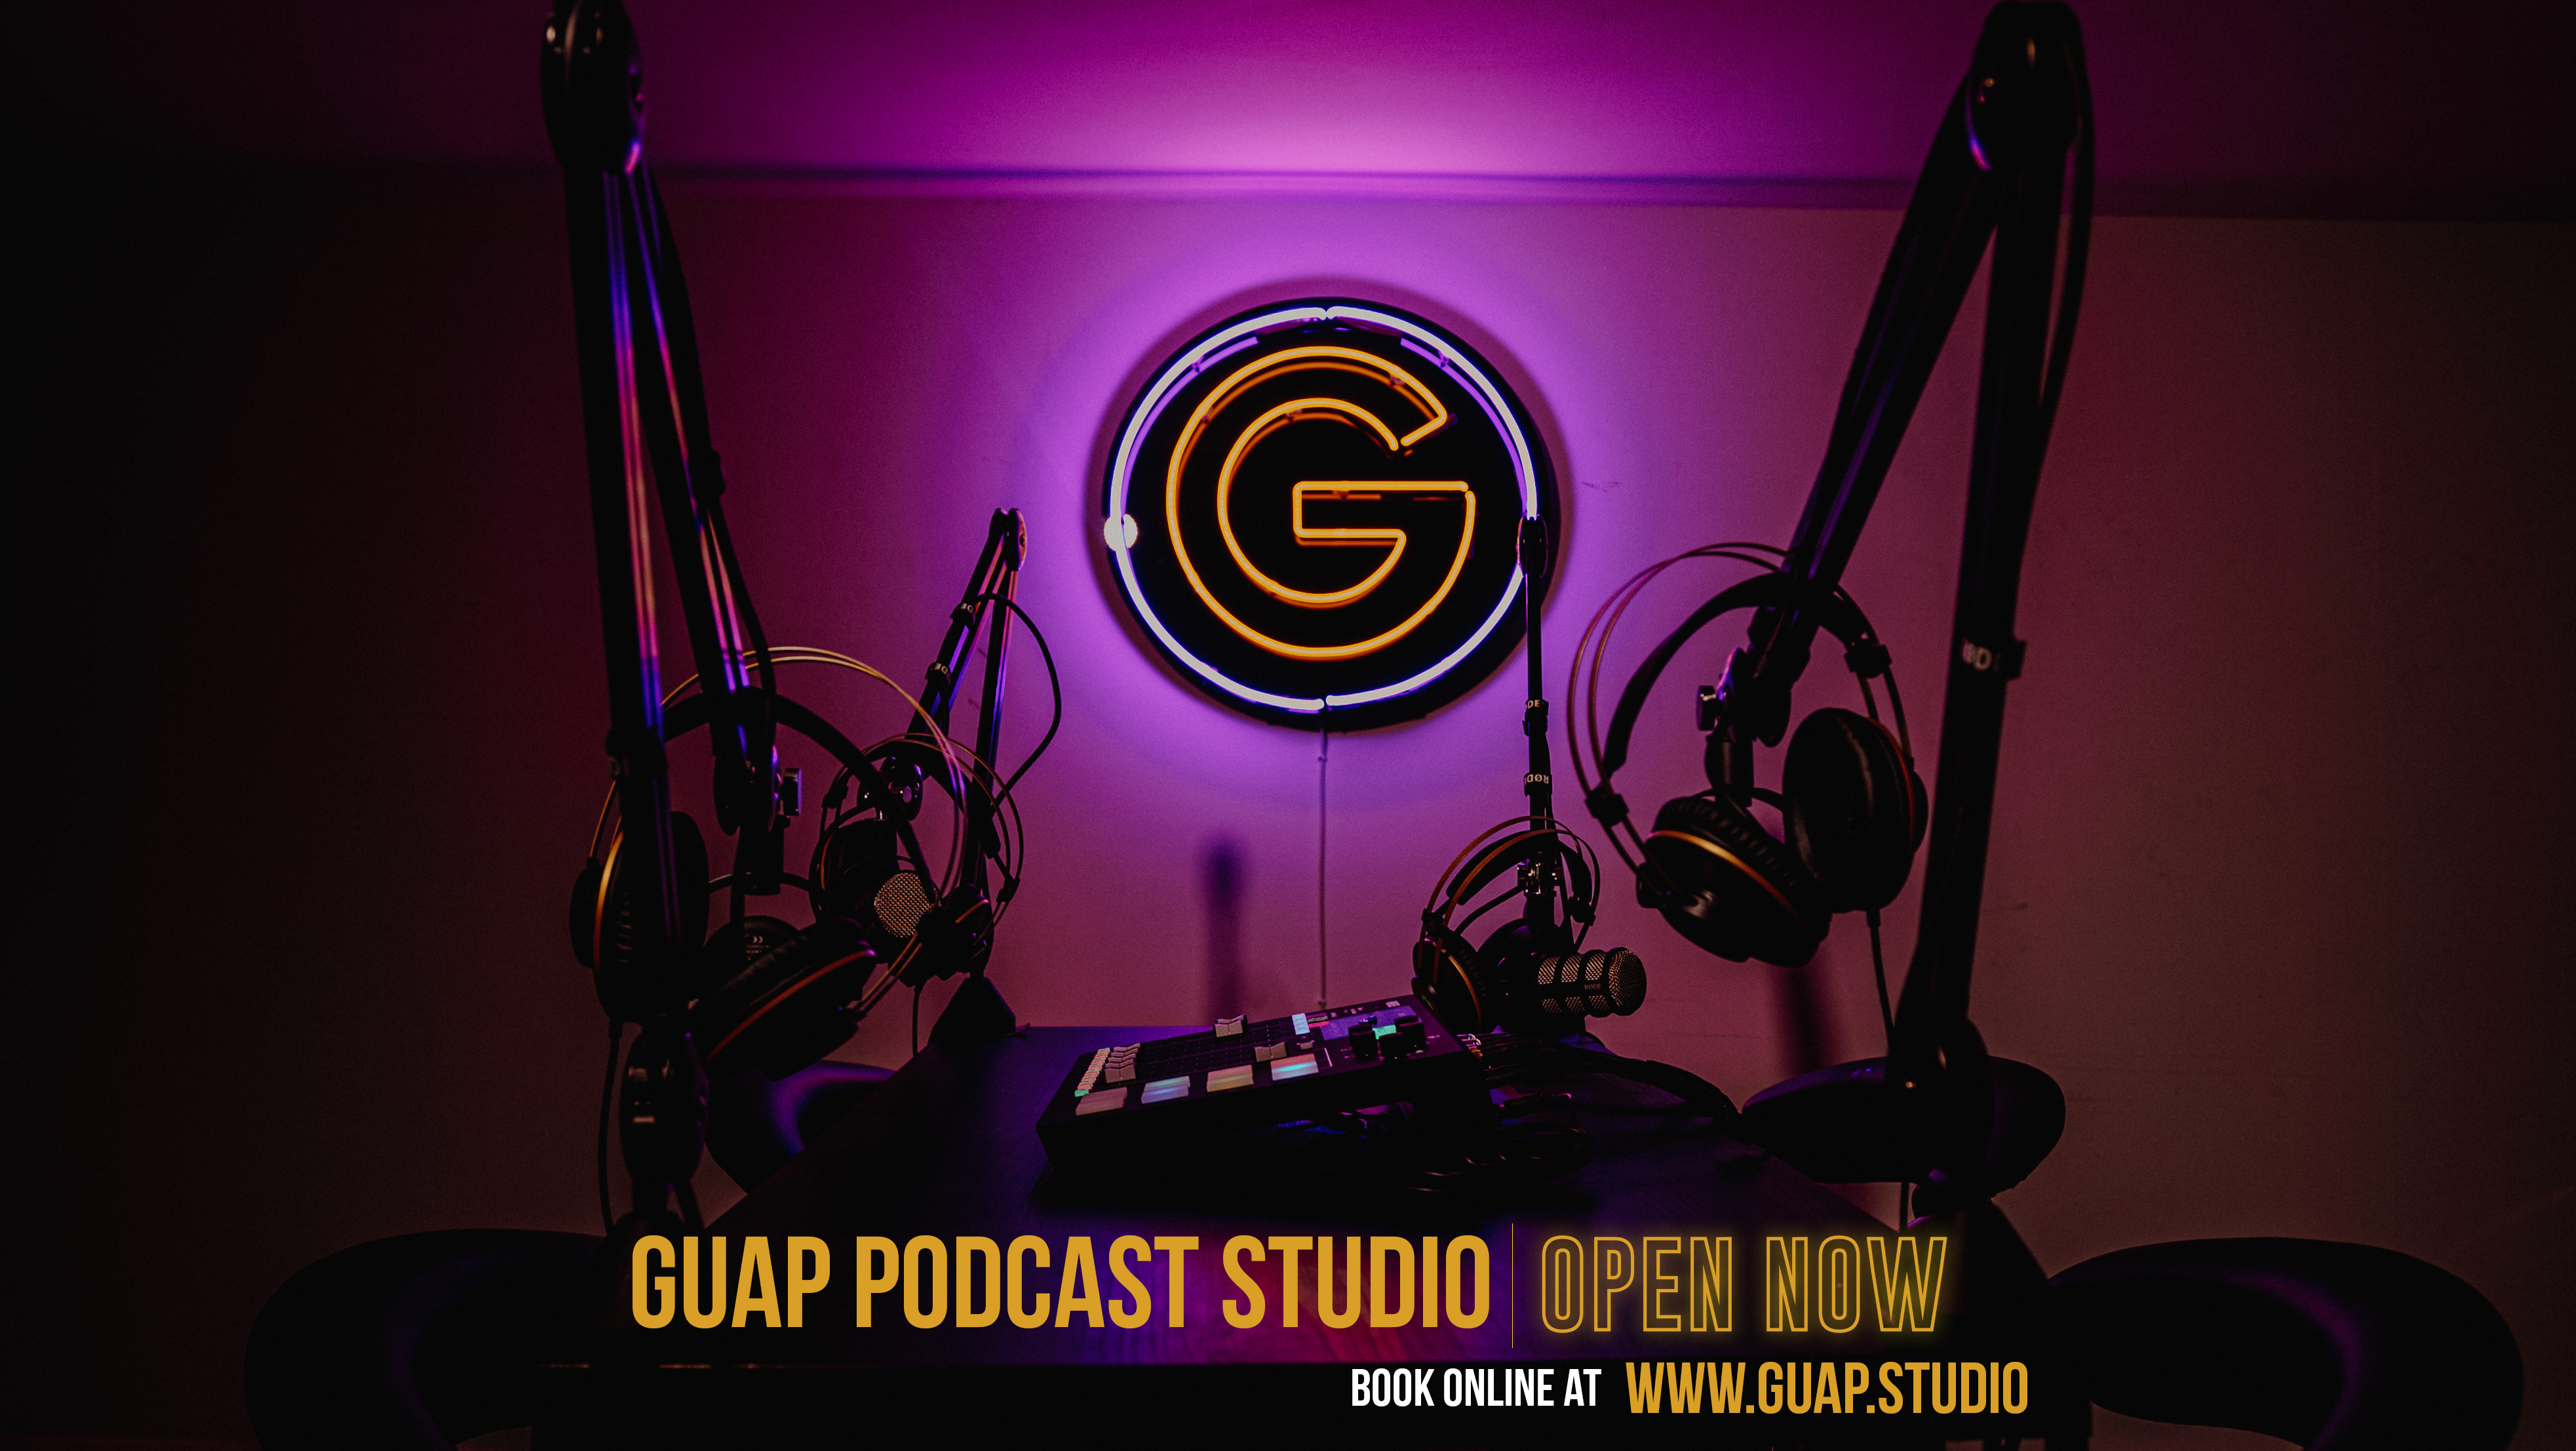 GUAP Studios, South London’s New Home of Podcasting, is Now Open